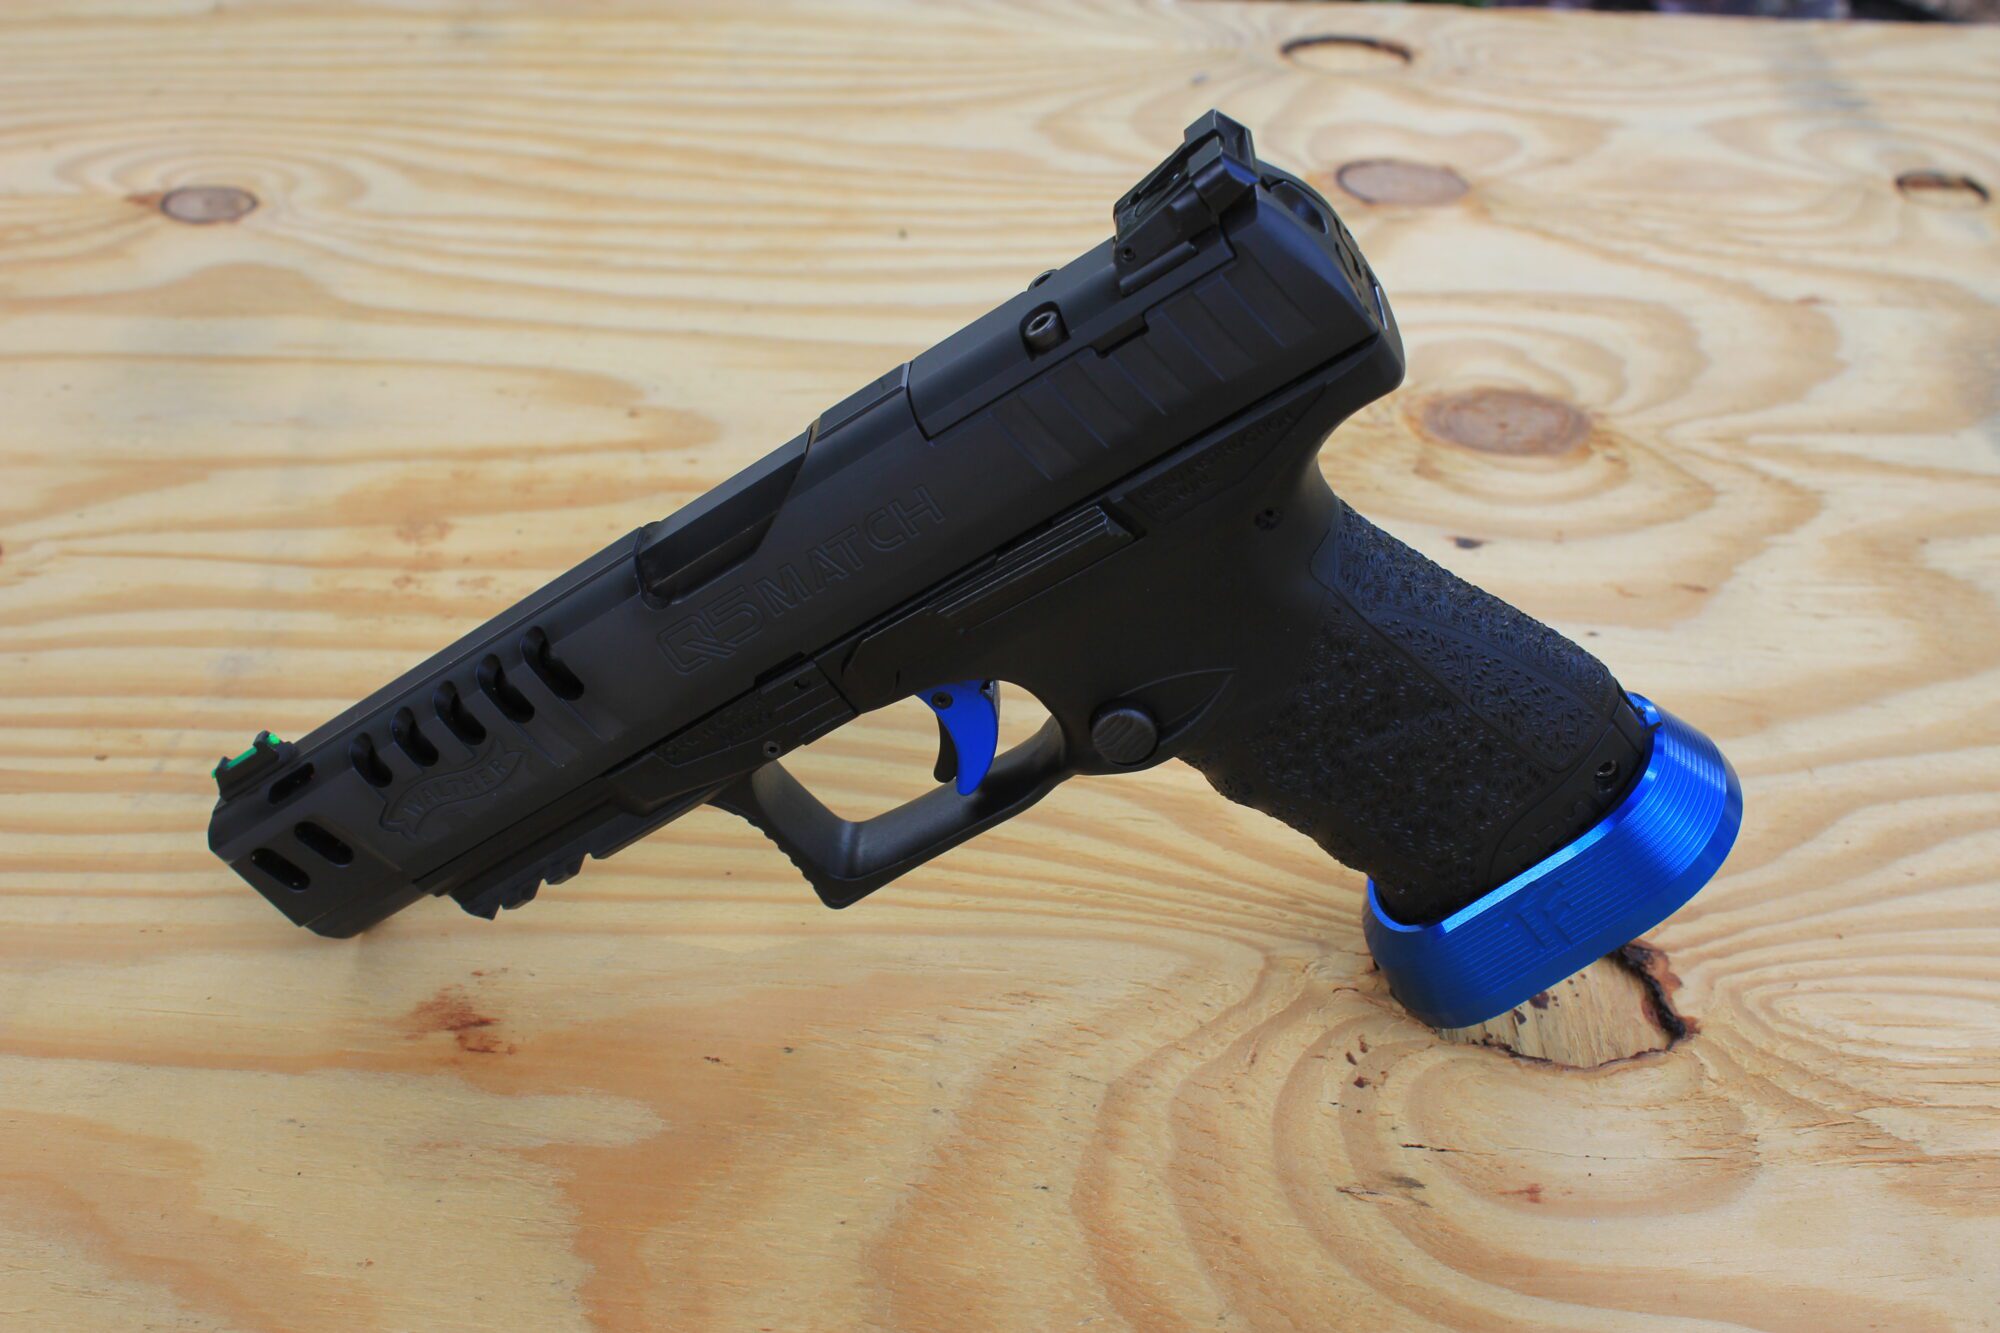 Walther Q5 Match Pistol Review